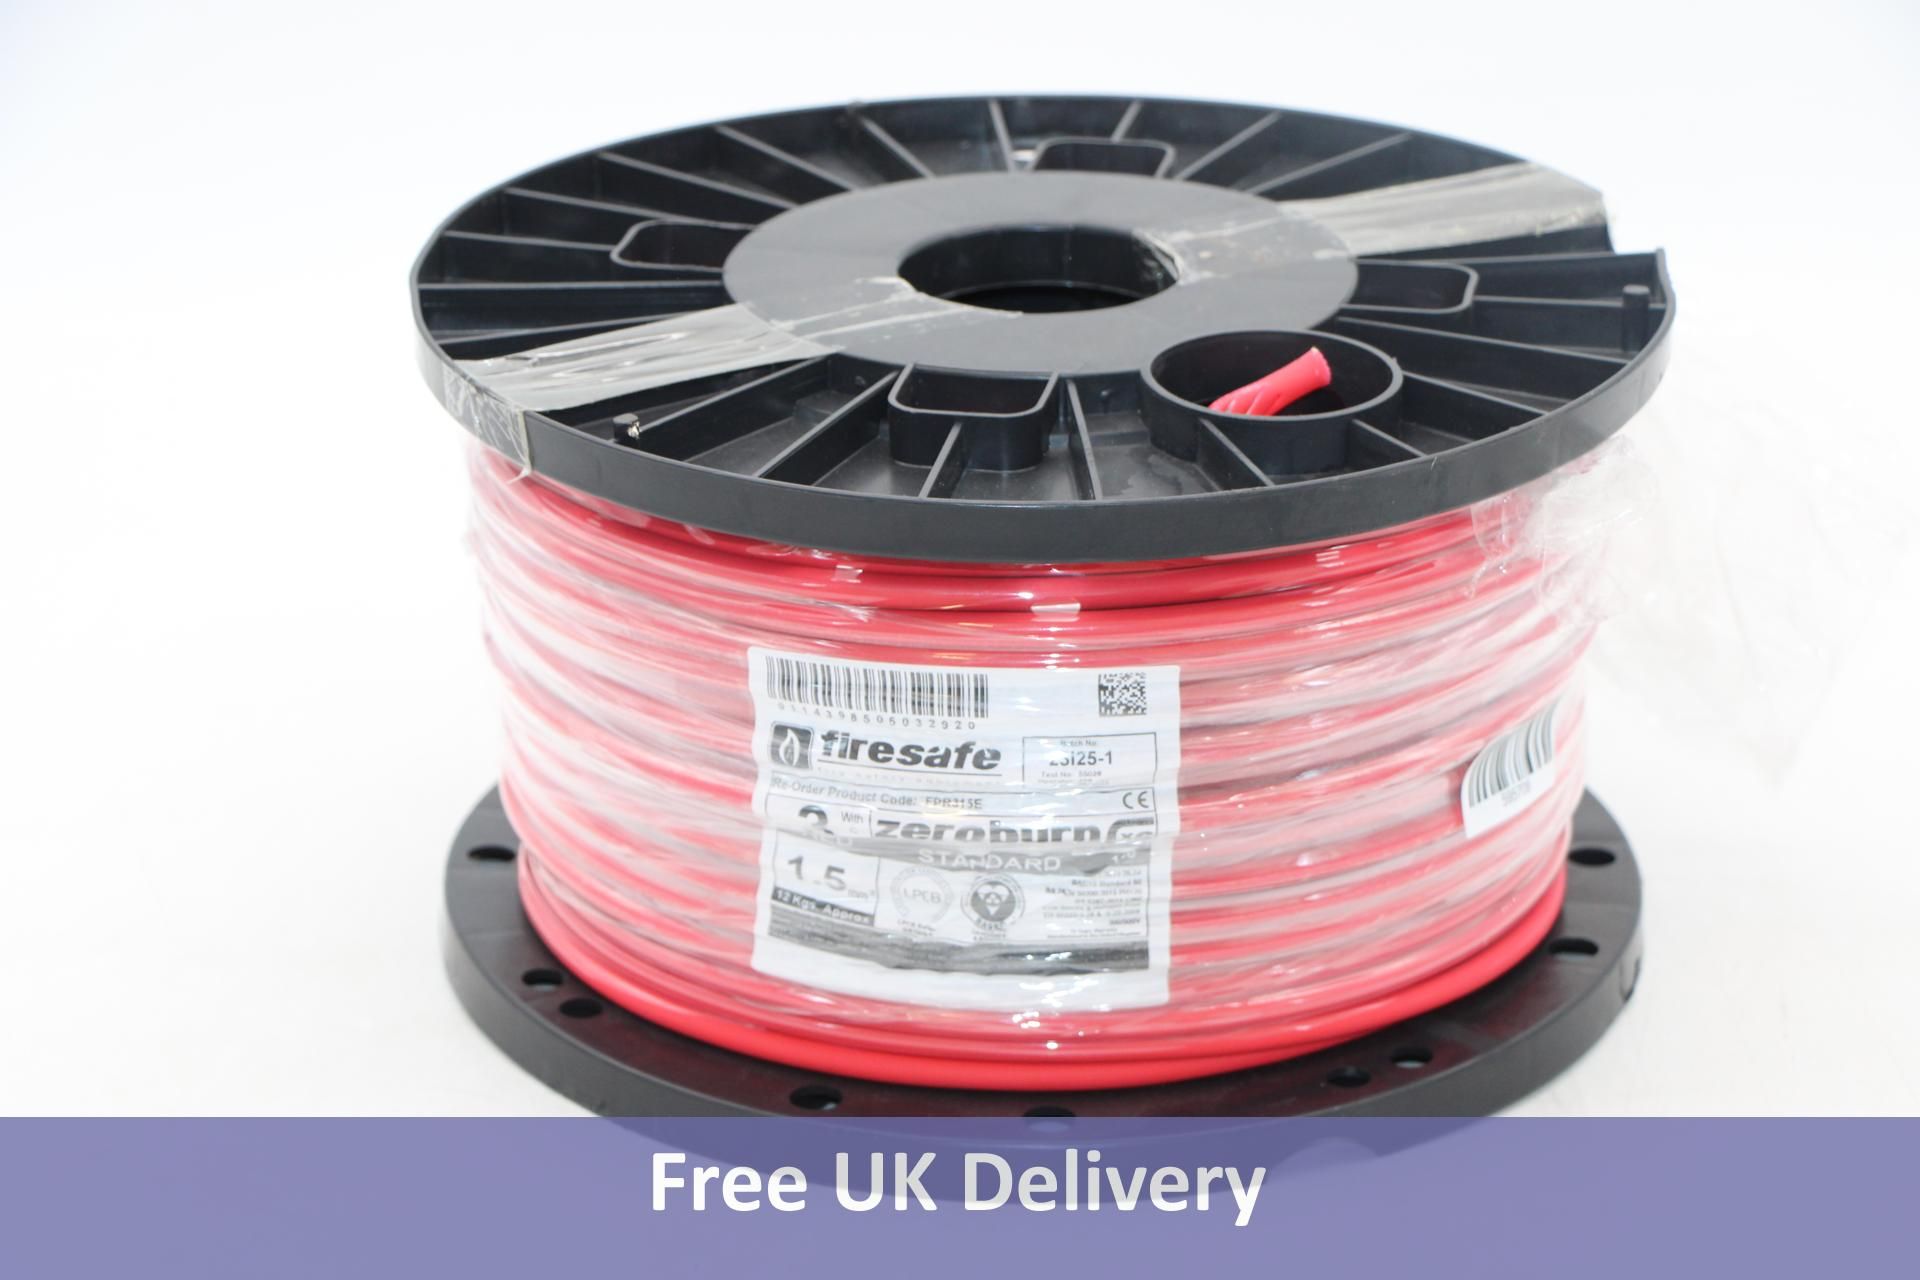 Zeroburn 1.5mm² FireSafe Cable 3 C+E, Red, 100m Drum, 3 Core, Damage to Reel, Cable Unaffected